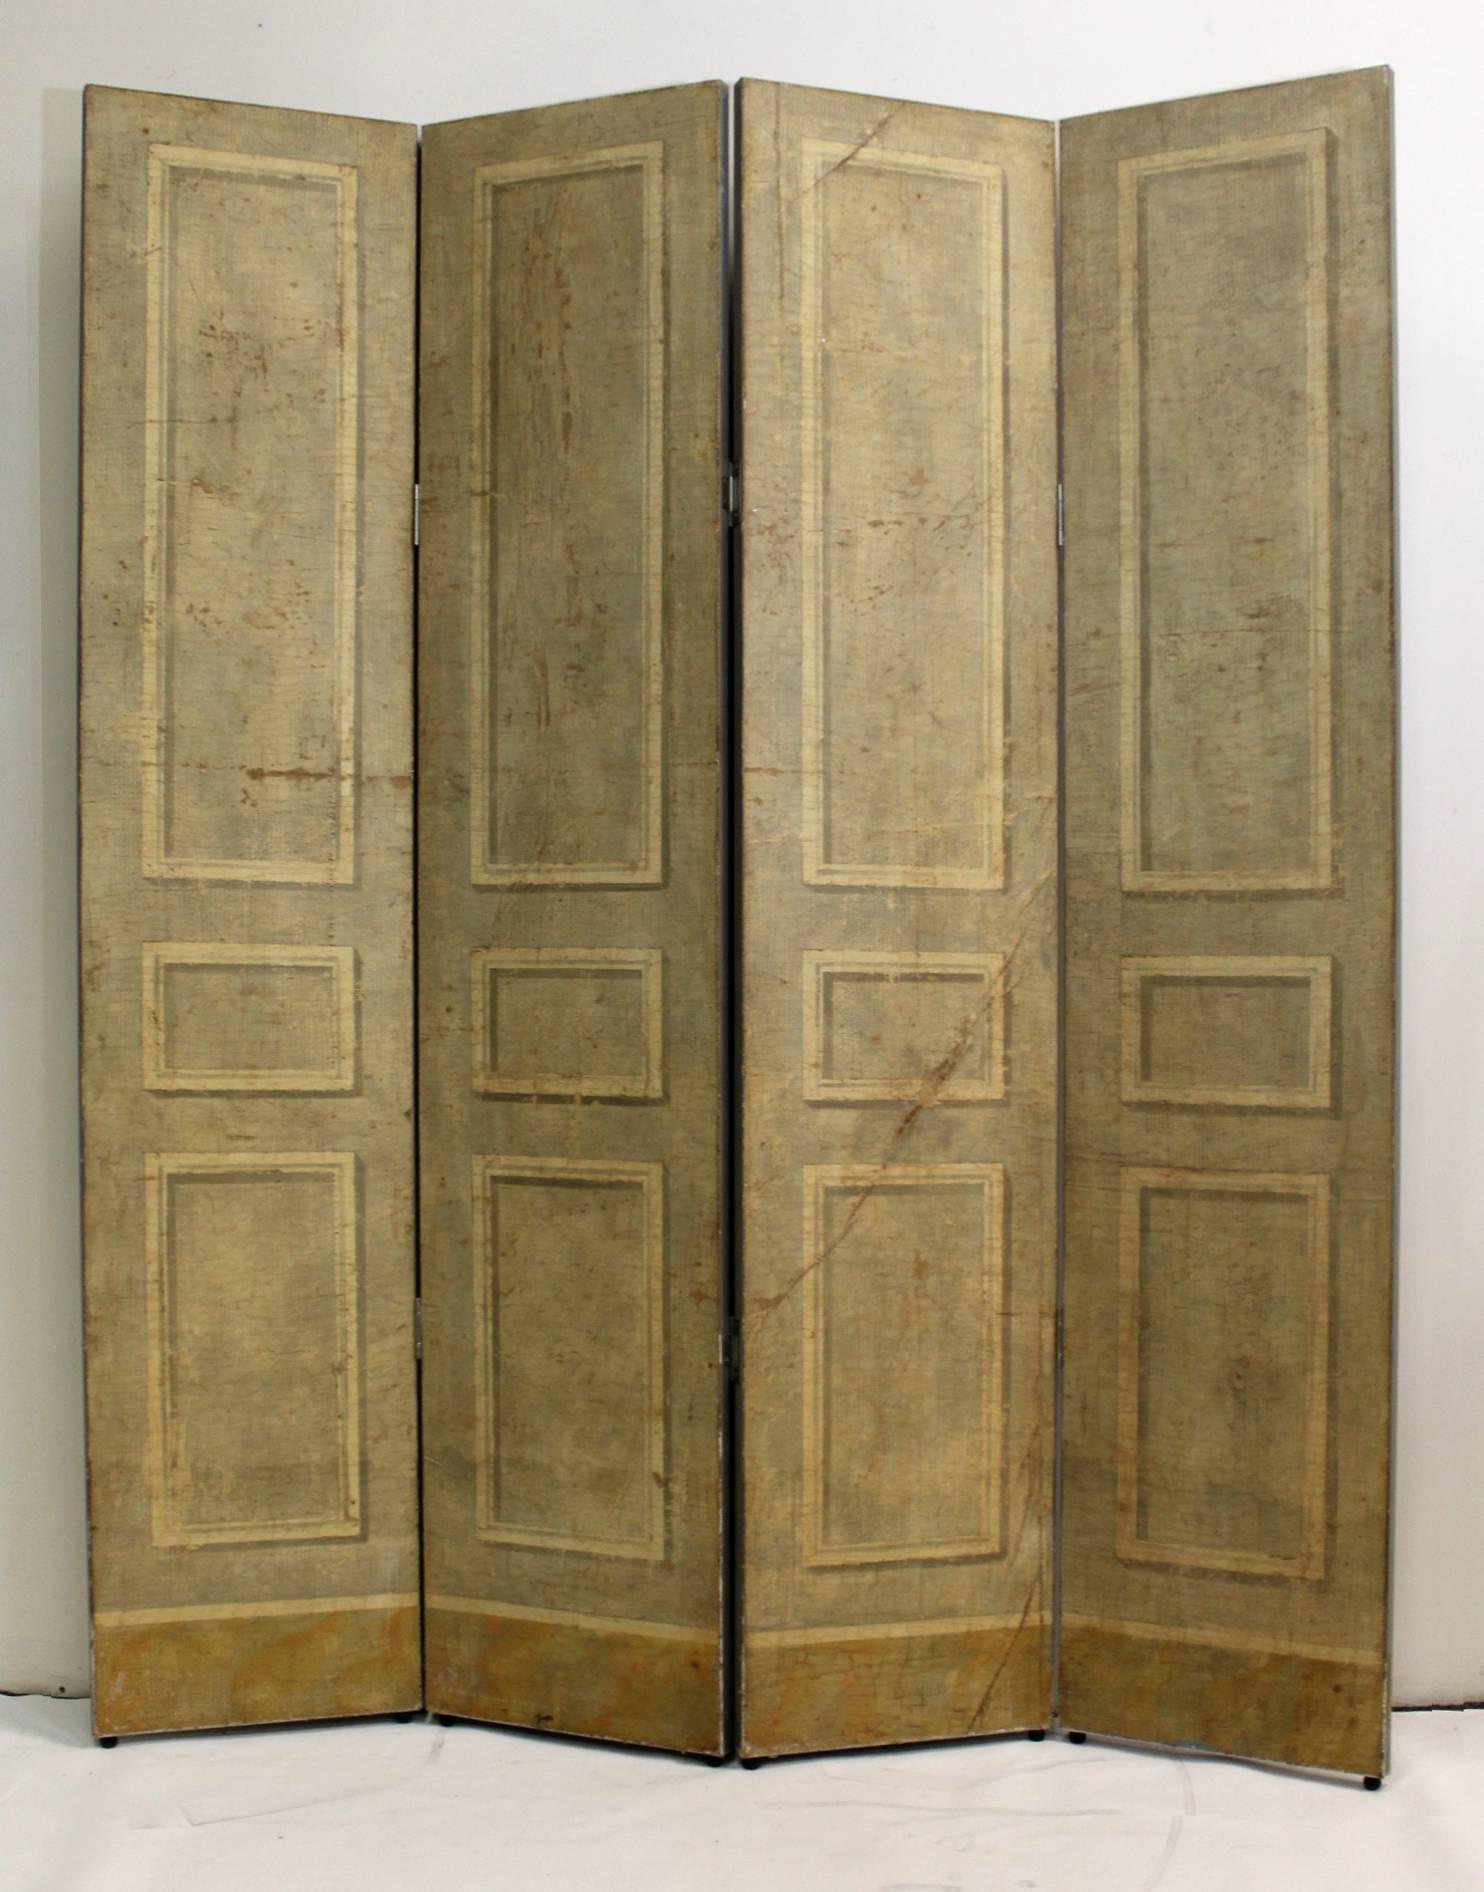 Hand-painted trompe l'oeil fresco applied to wooden panels. Has beautiful, aged patina. Handmade by artist Jacques Lamy in the 1990s.

Dimensions open: 79.5